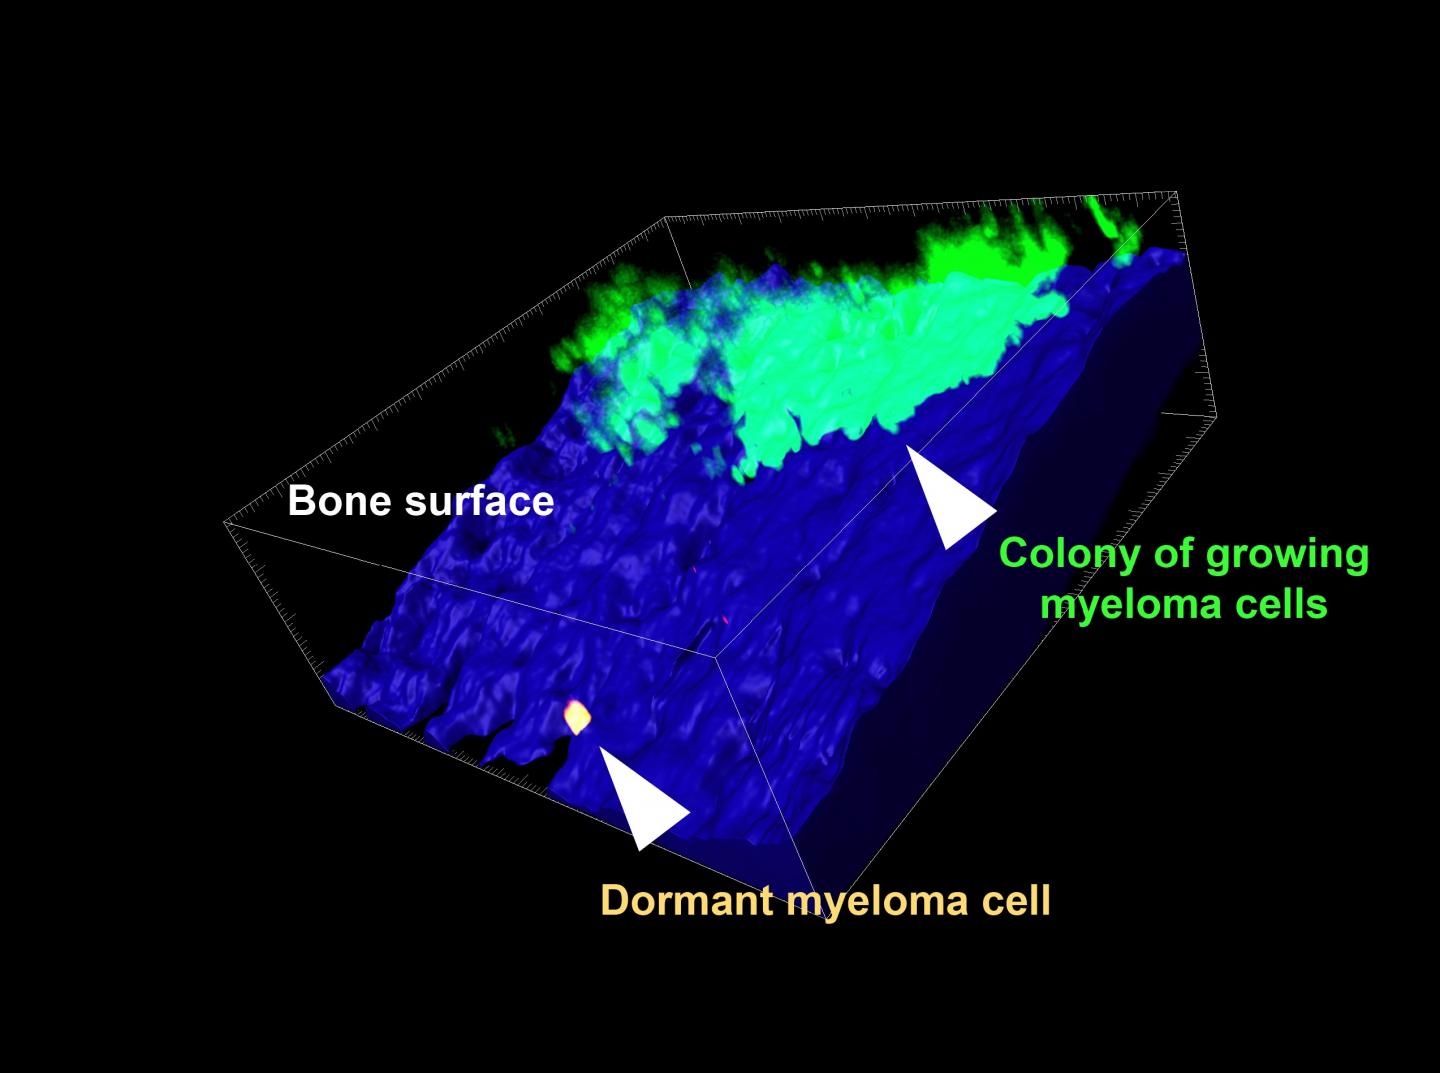 Researchers Have Identified What Keeps Some Cancer Cells Dormant (1 of 2)